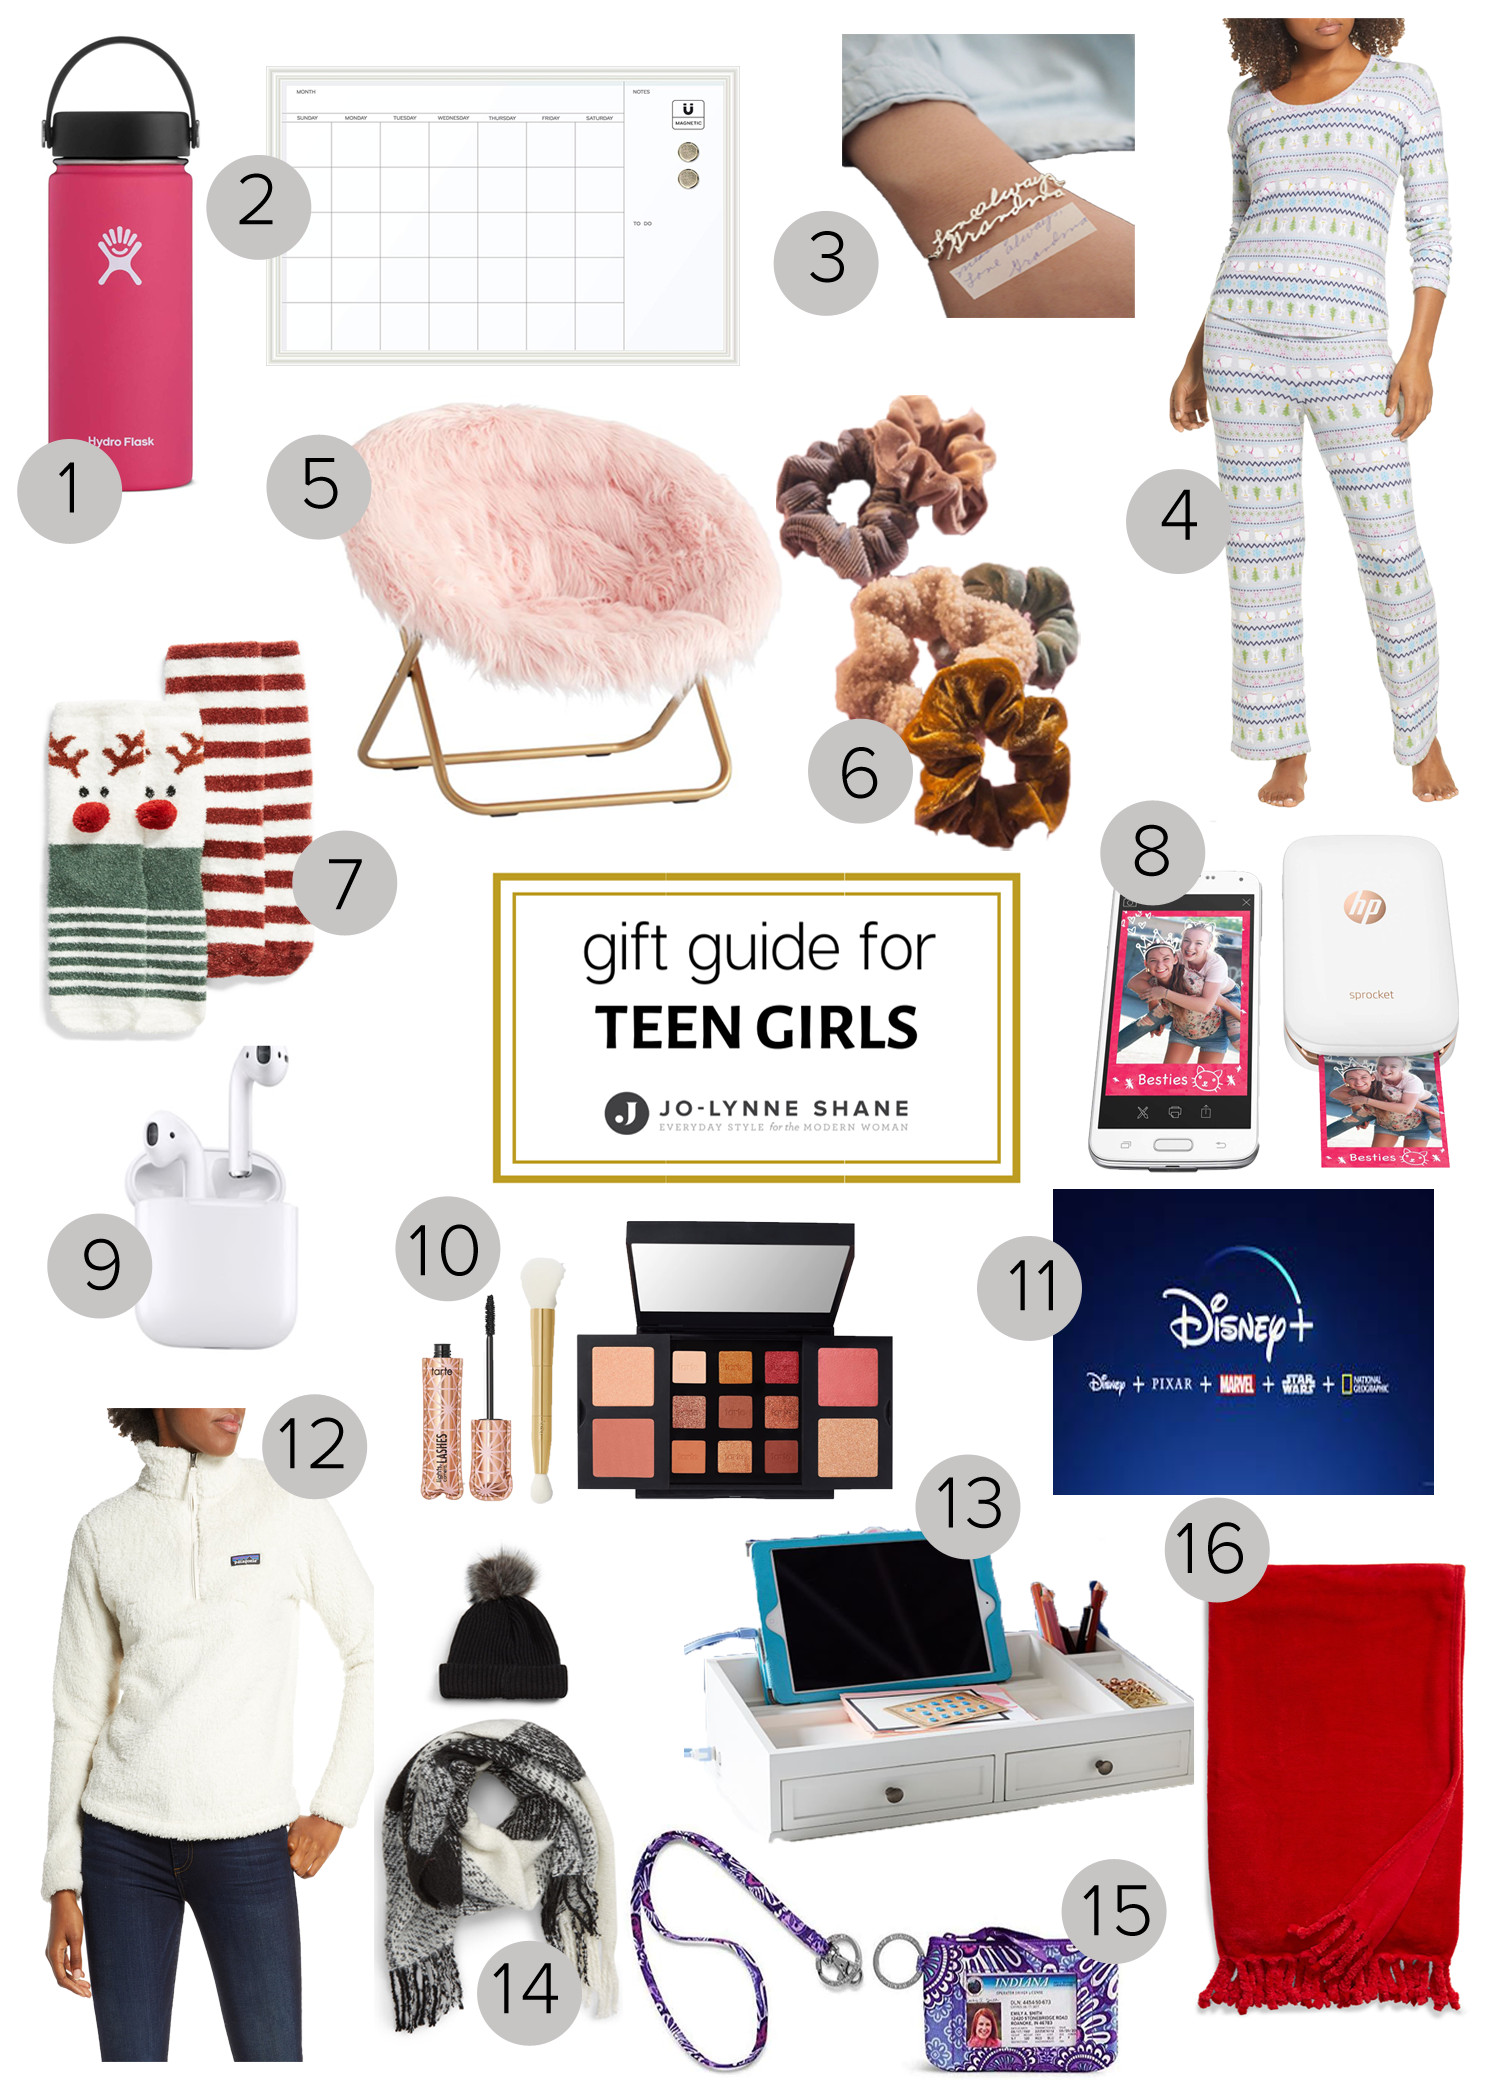 Christmas Gift Ideas For Young Girls
 Holiday Gift Ideas for Teen Girls